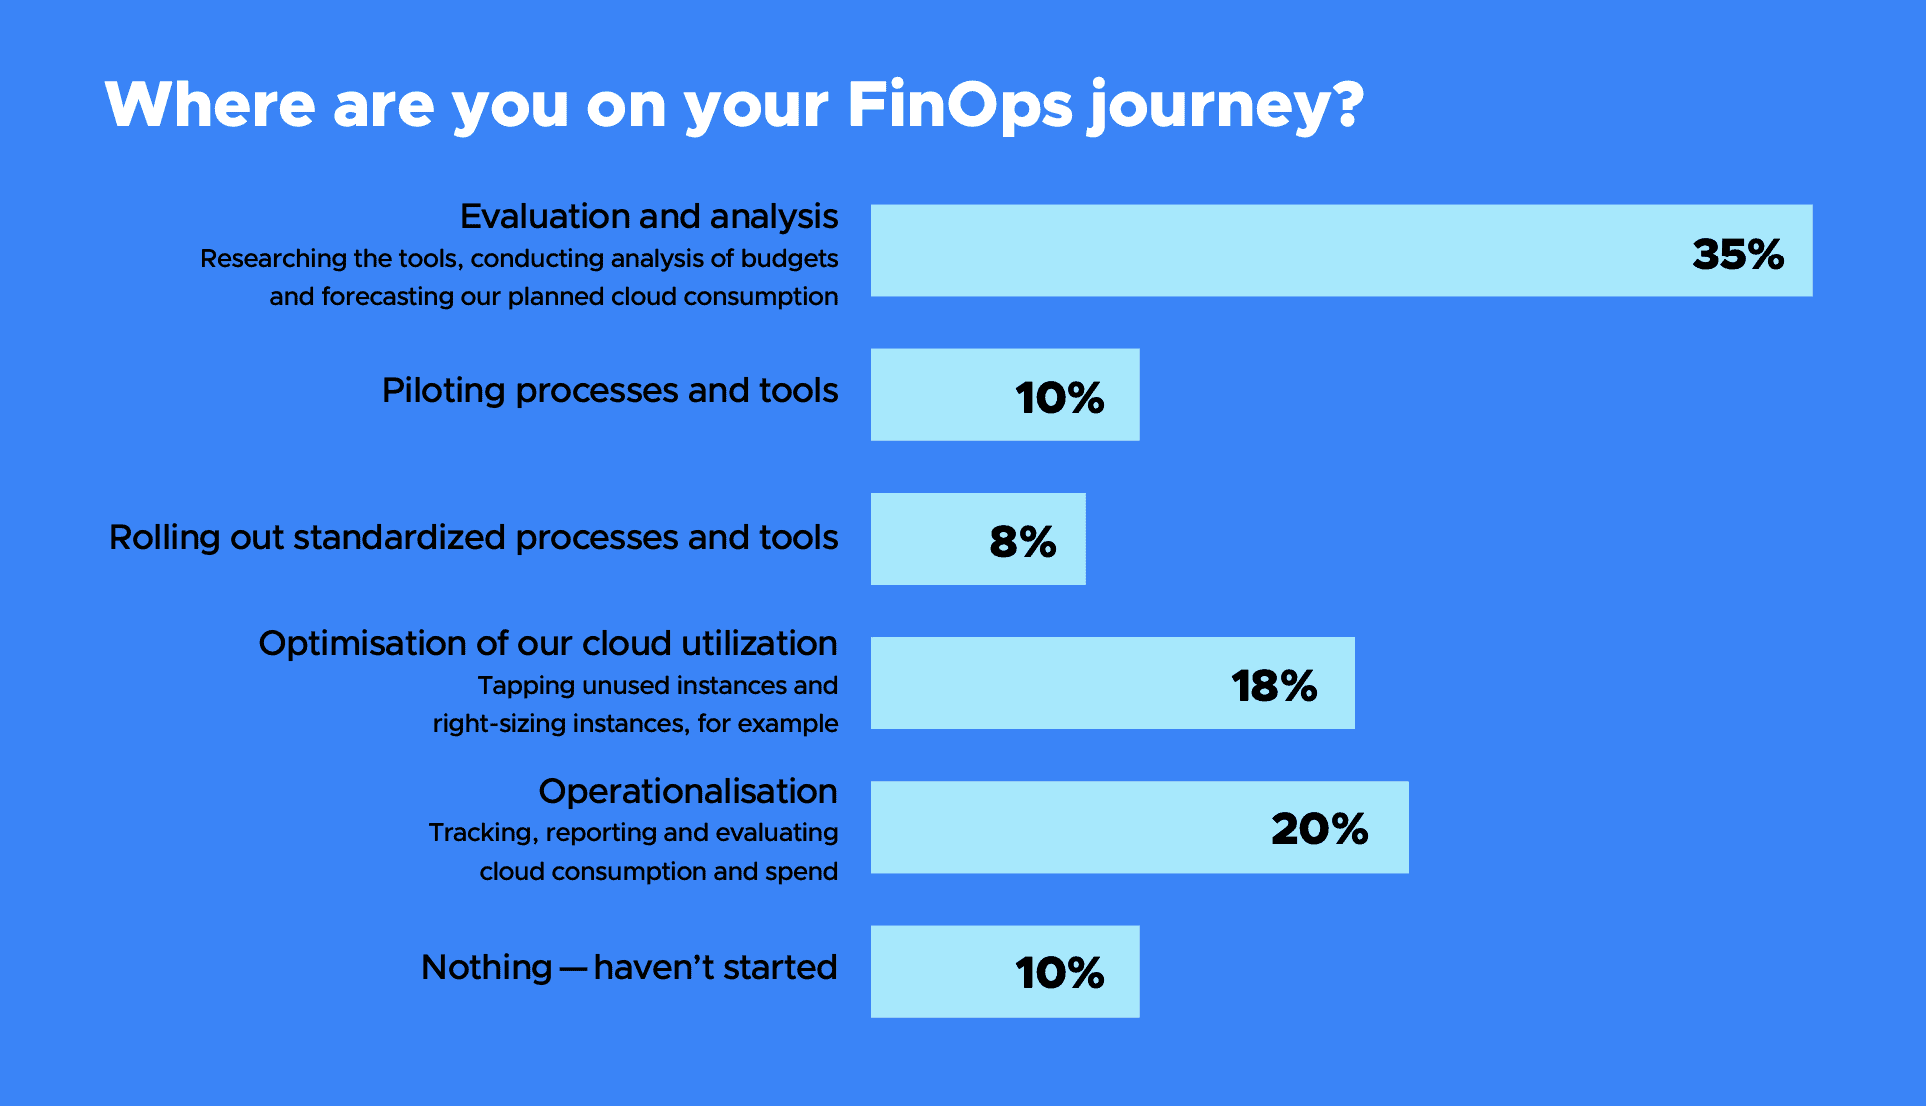 Bar chart showing respondent's answers for "Where are you on your FinOps journey?" 35% chose Evaluation and analysis, researching the toolds, conducting analysis of budgets and forecasting our planned cloud consumption